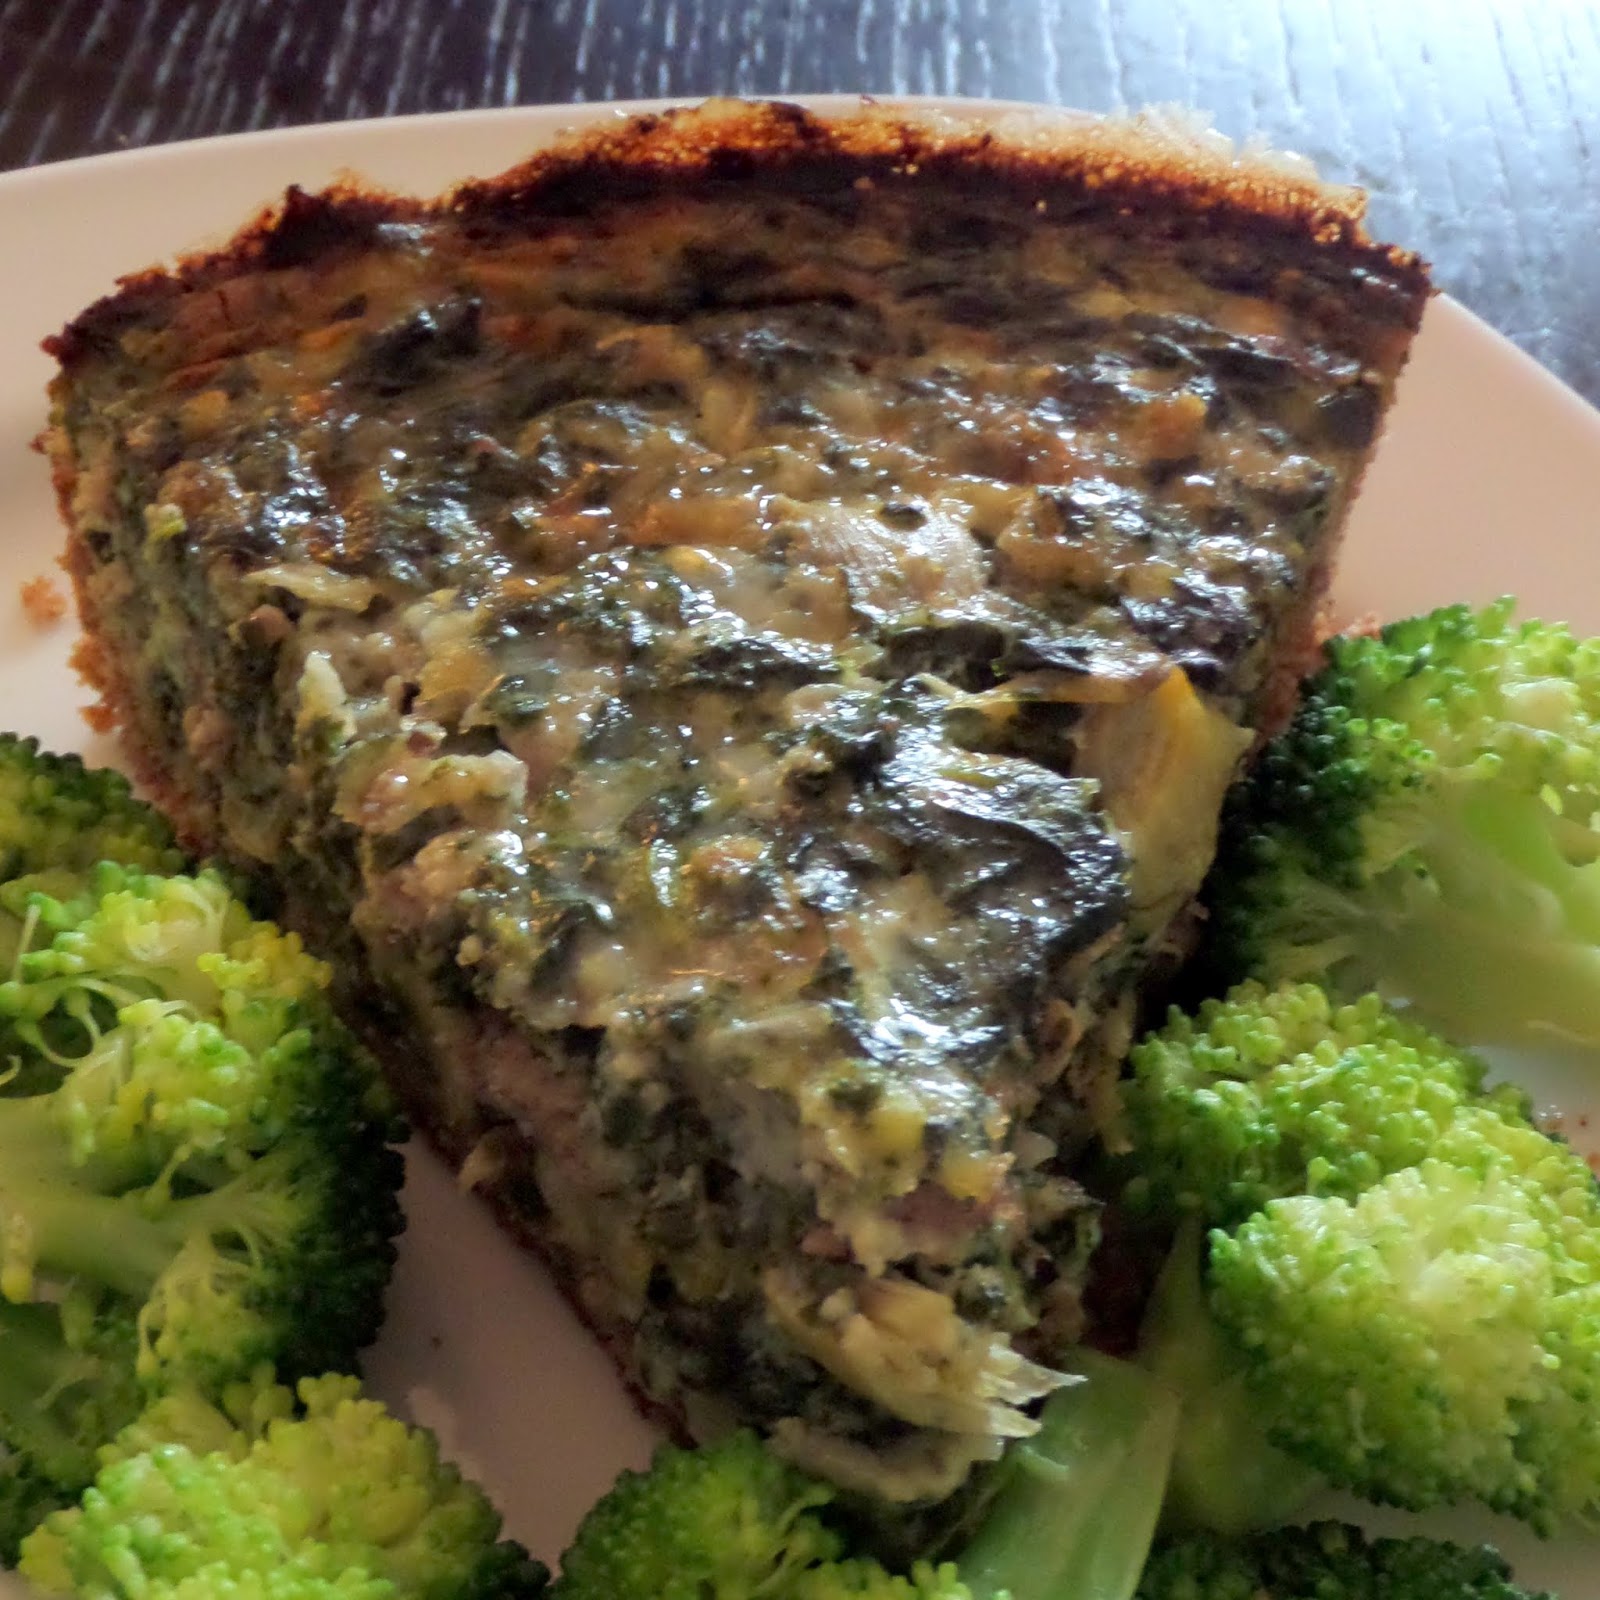 Spinach Artichoke Quiche:  A quiche packed with turkey sausage, cheese, spinach, and artichoke hearts.